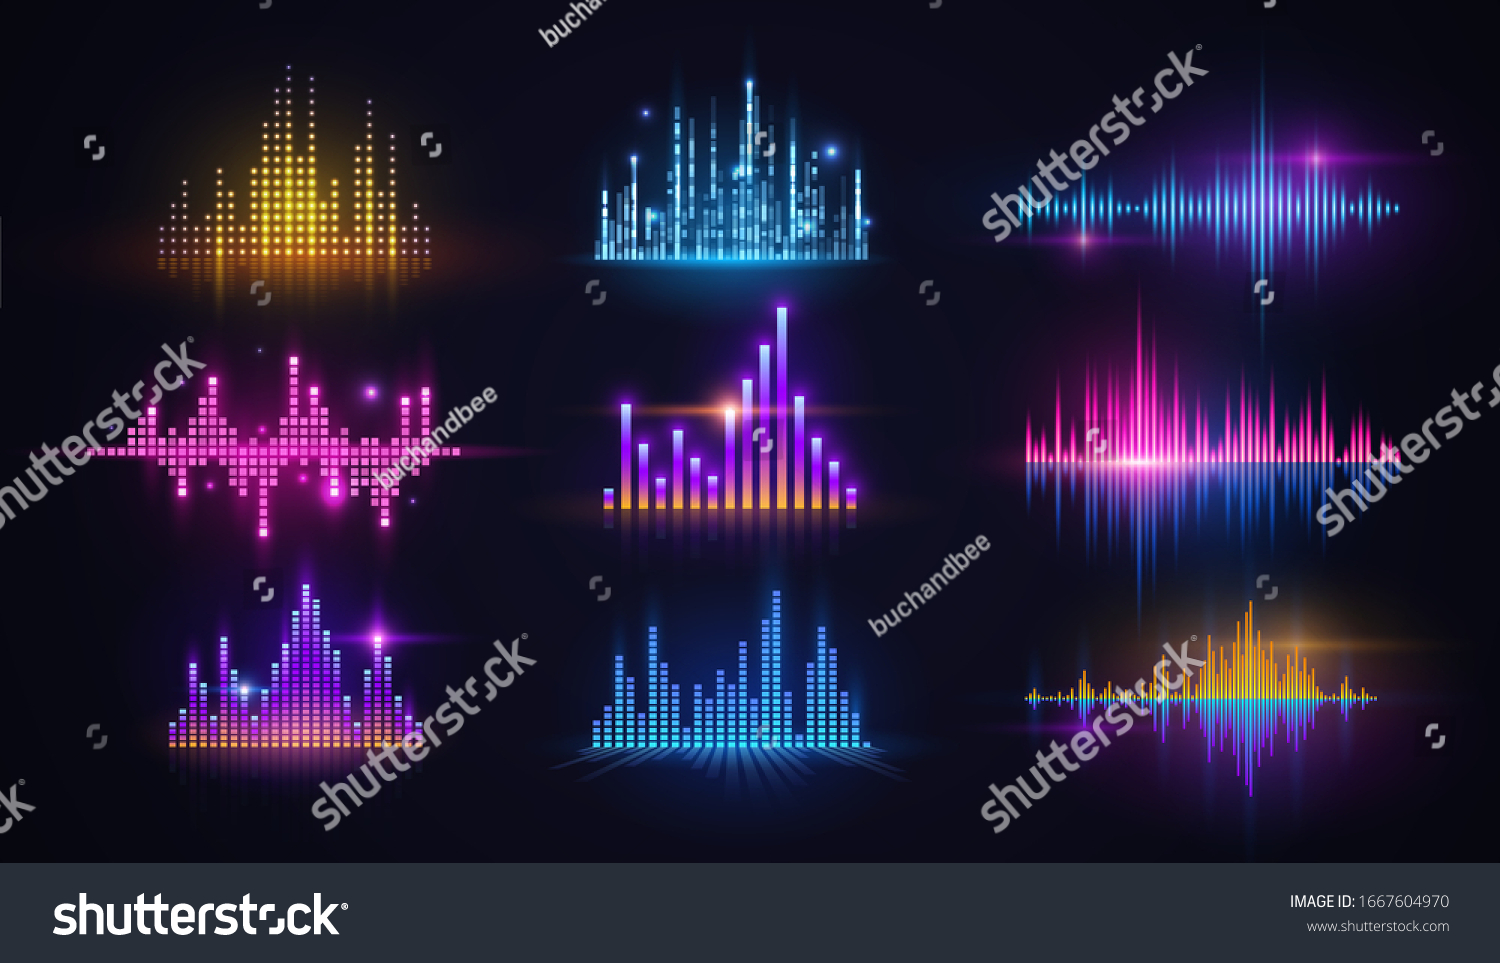 SVG of Music equalizer neon sound waves, audio digital technology vector design. Sound frequency spectrum abstract music wave patterns with blue, purple and yellow glowing light graphs svg